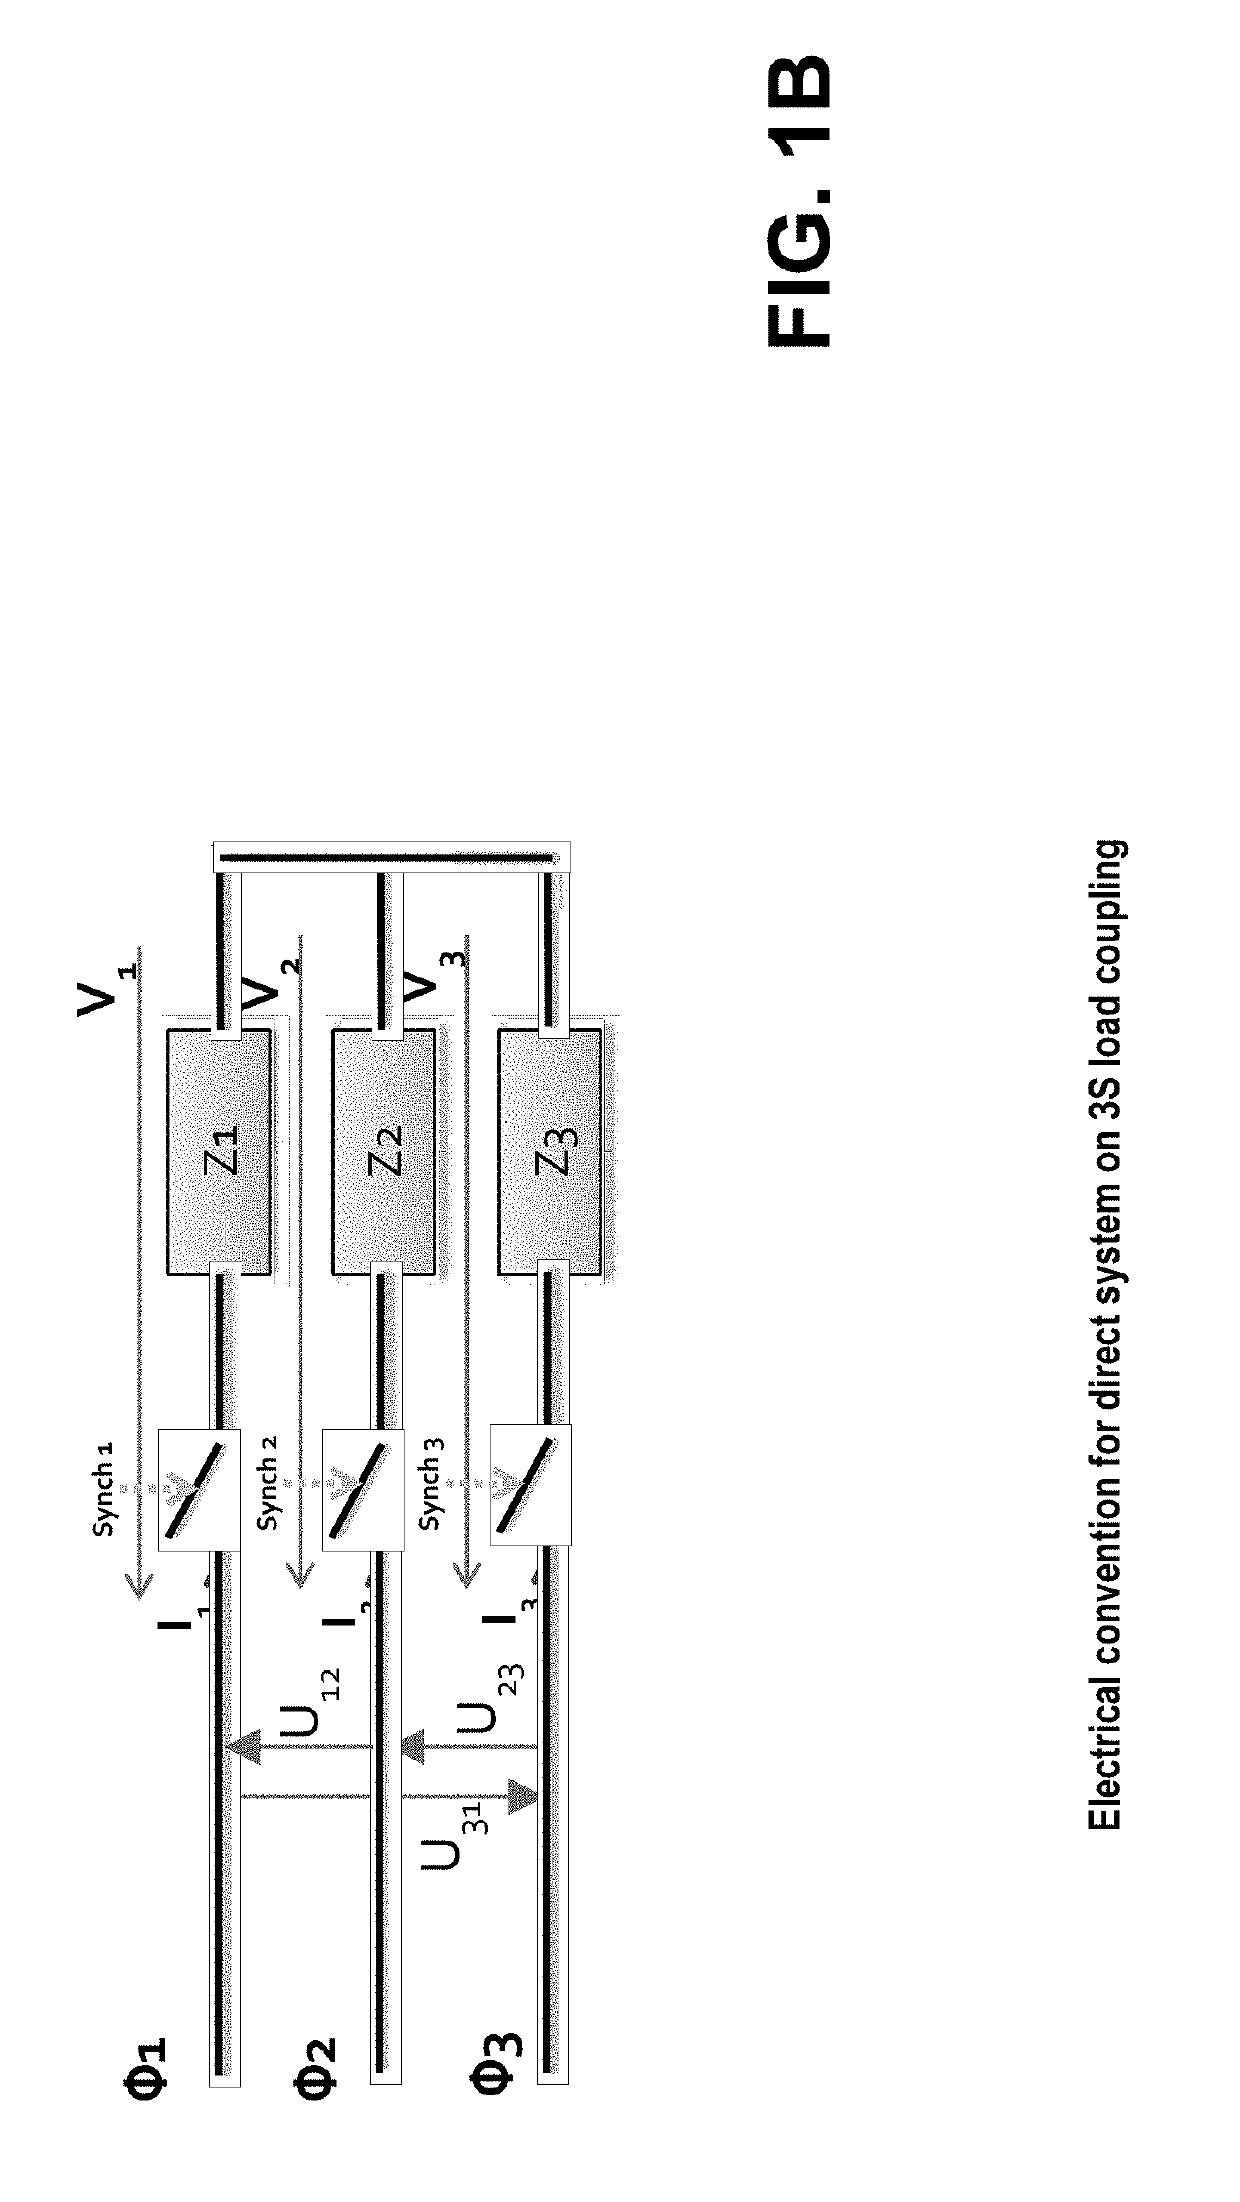 Method to drive a power control device connected to unbalanced three-phase loads when no neutral reference is available in an alternative electrical network